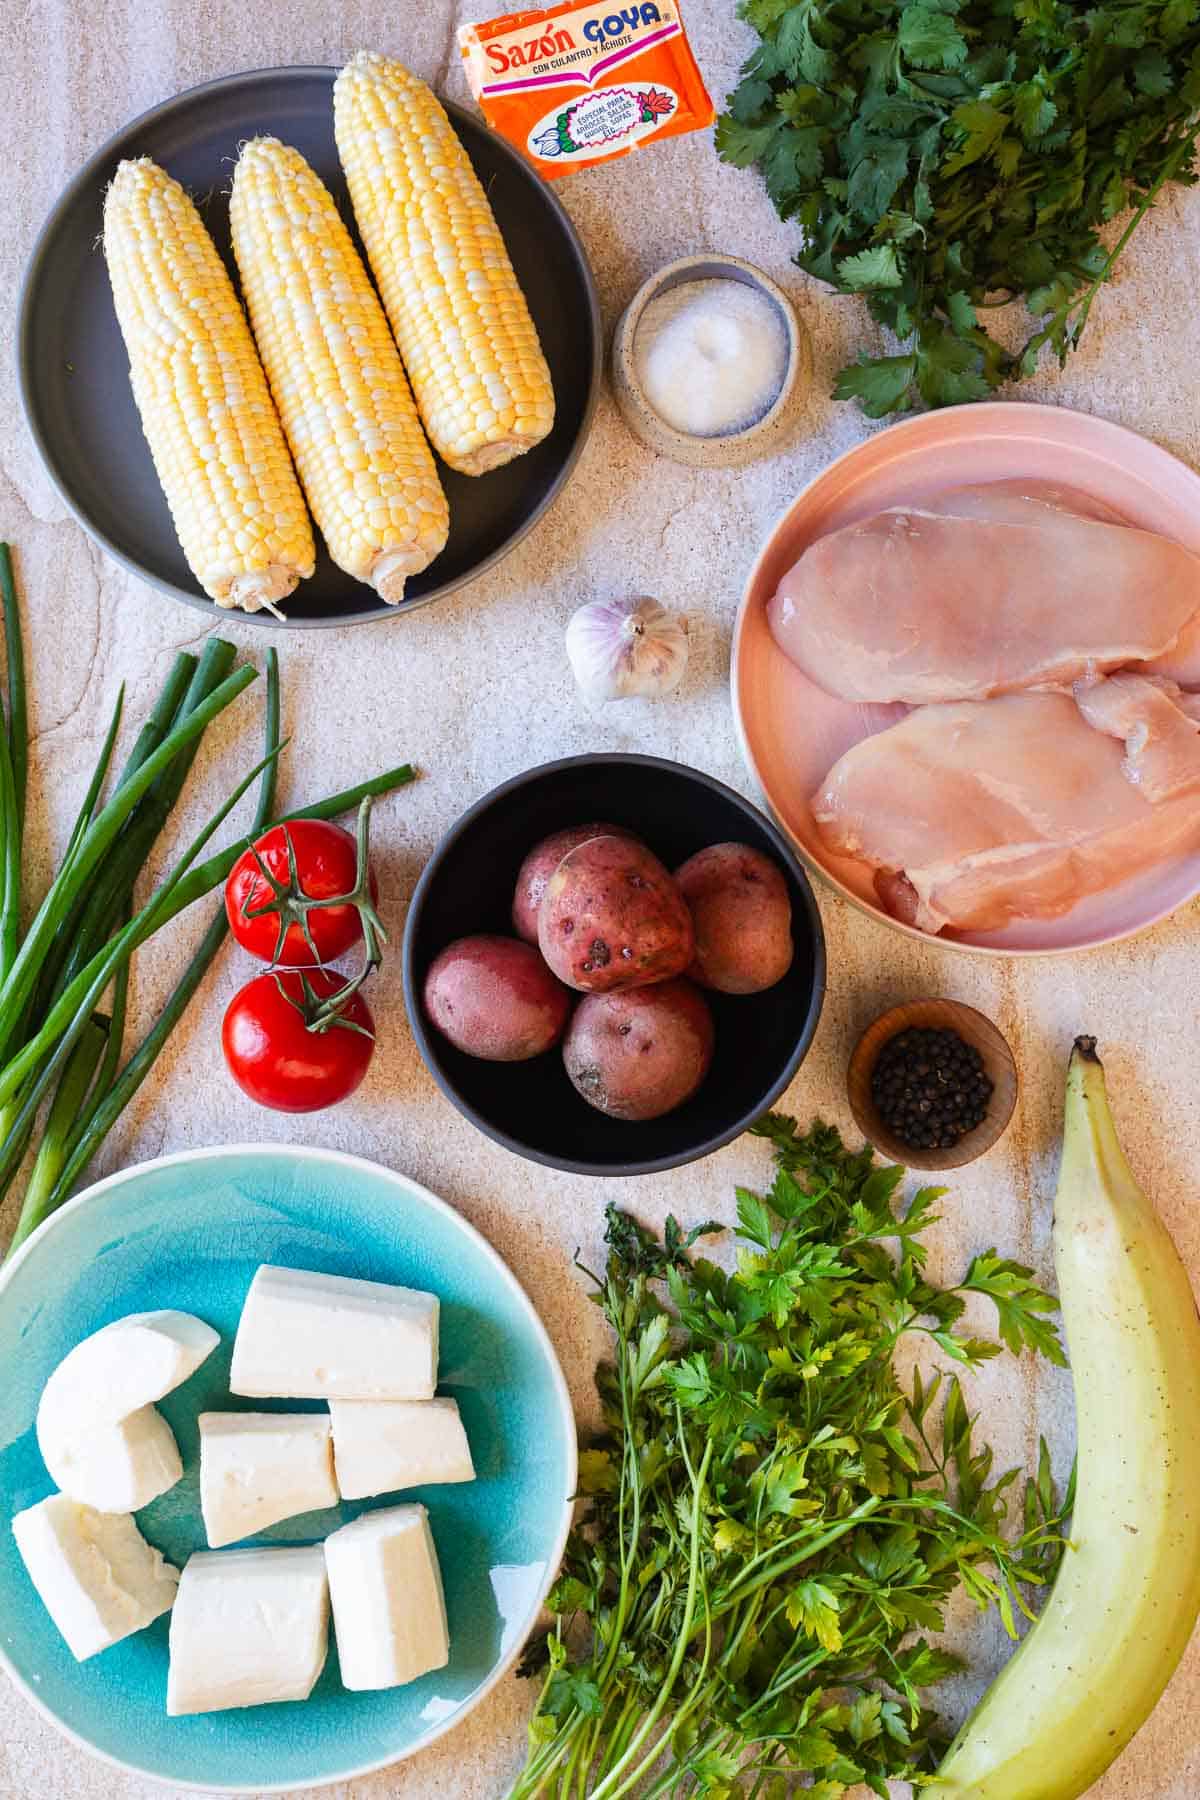 ingredients for chicken sancocho are displayed on a countertop, including corn on the cob, chicken breasts, potatoes, cheese, green onions, tomatoes, garlic, herbs, a plantain, and spices.